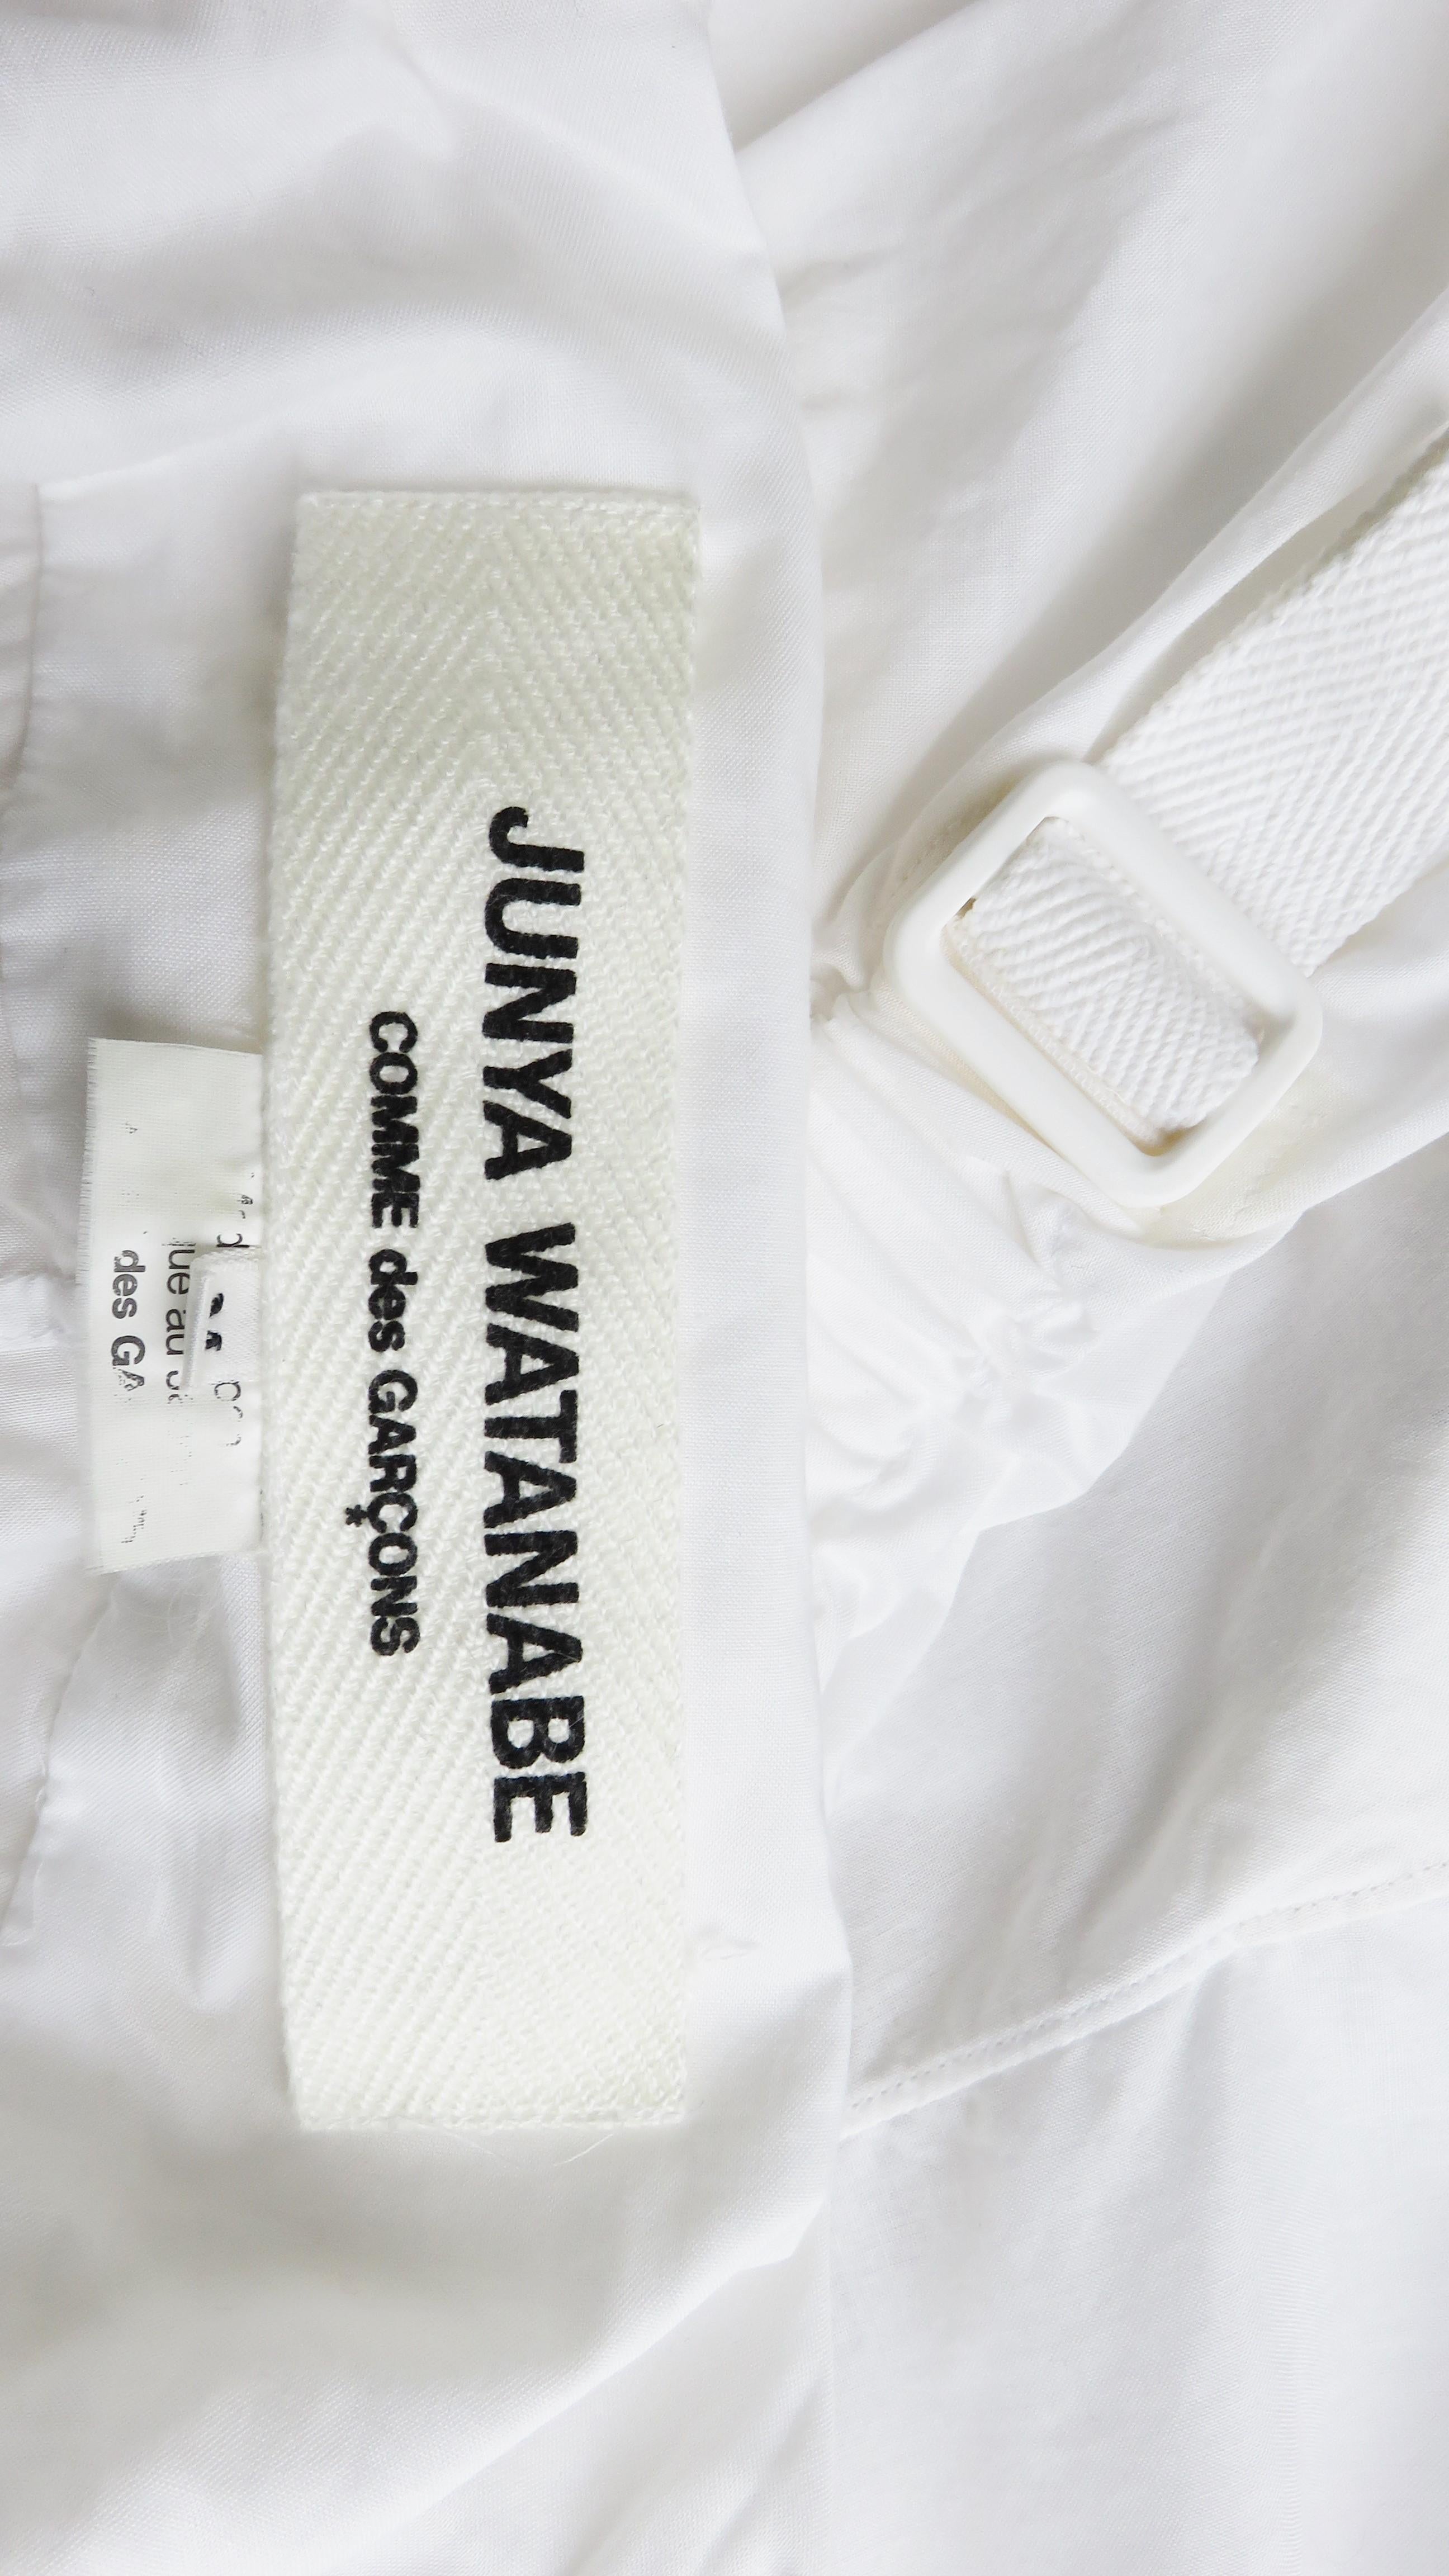 Comme des Garcons AD 2002 Junya Watanabe Shirt For Sale 8